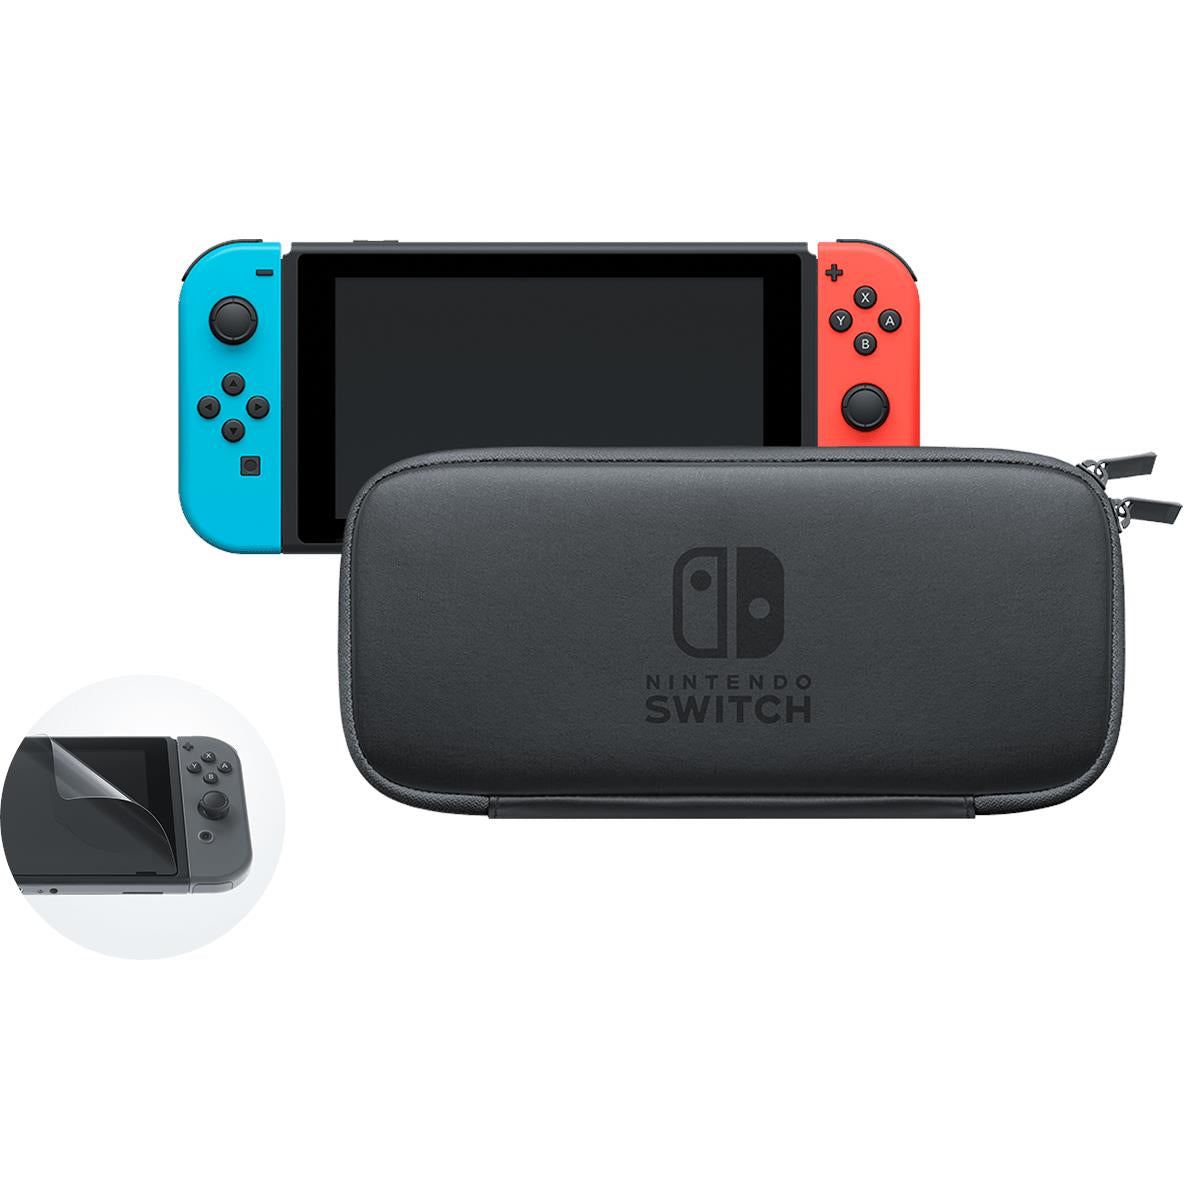 nintendo switch carrying case & screen protector